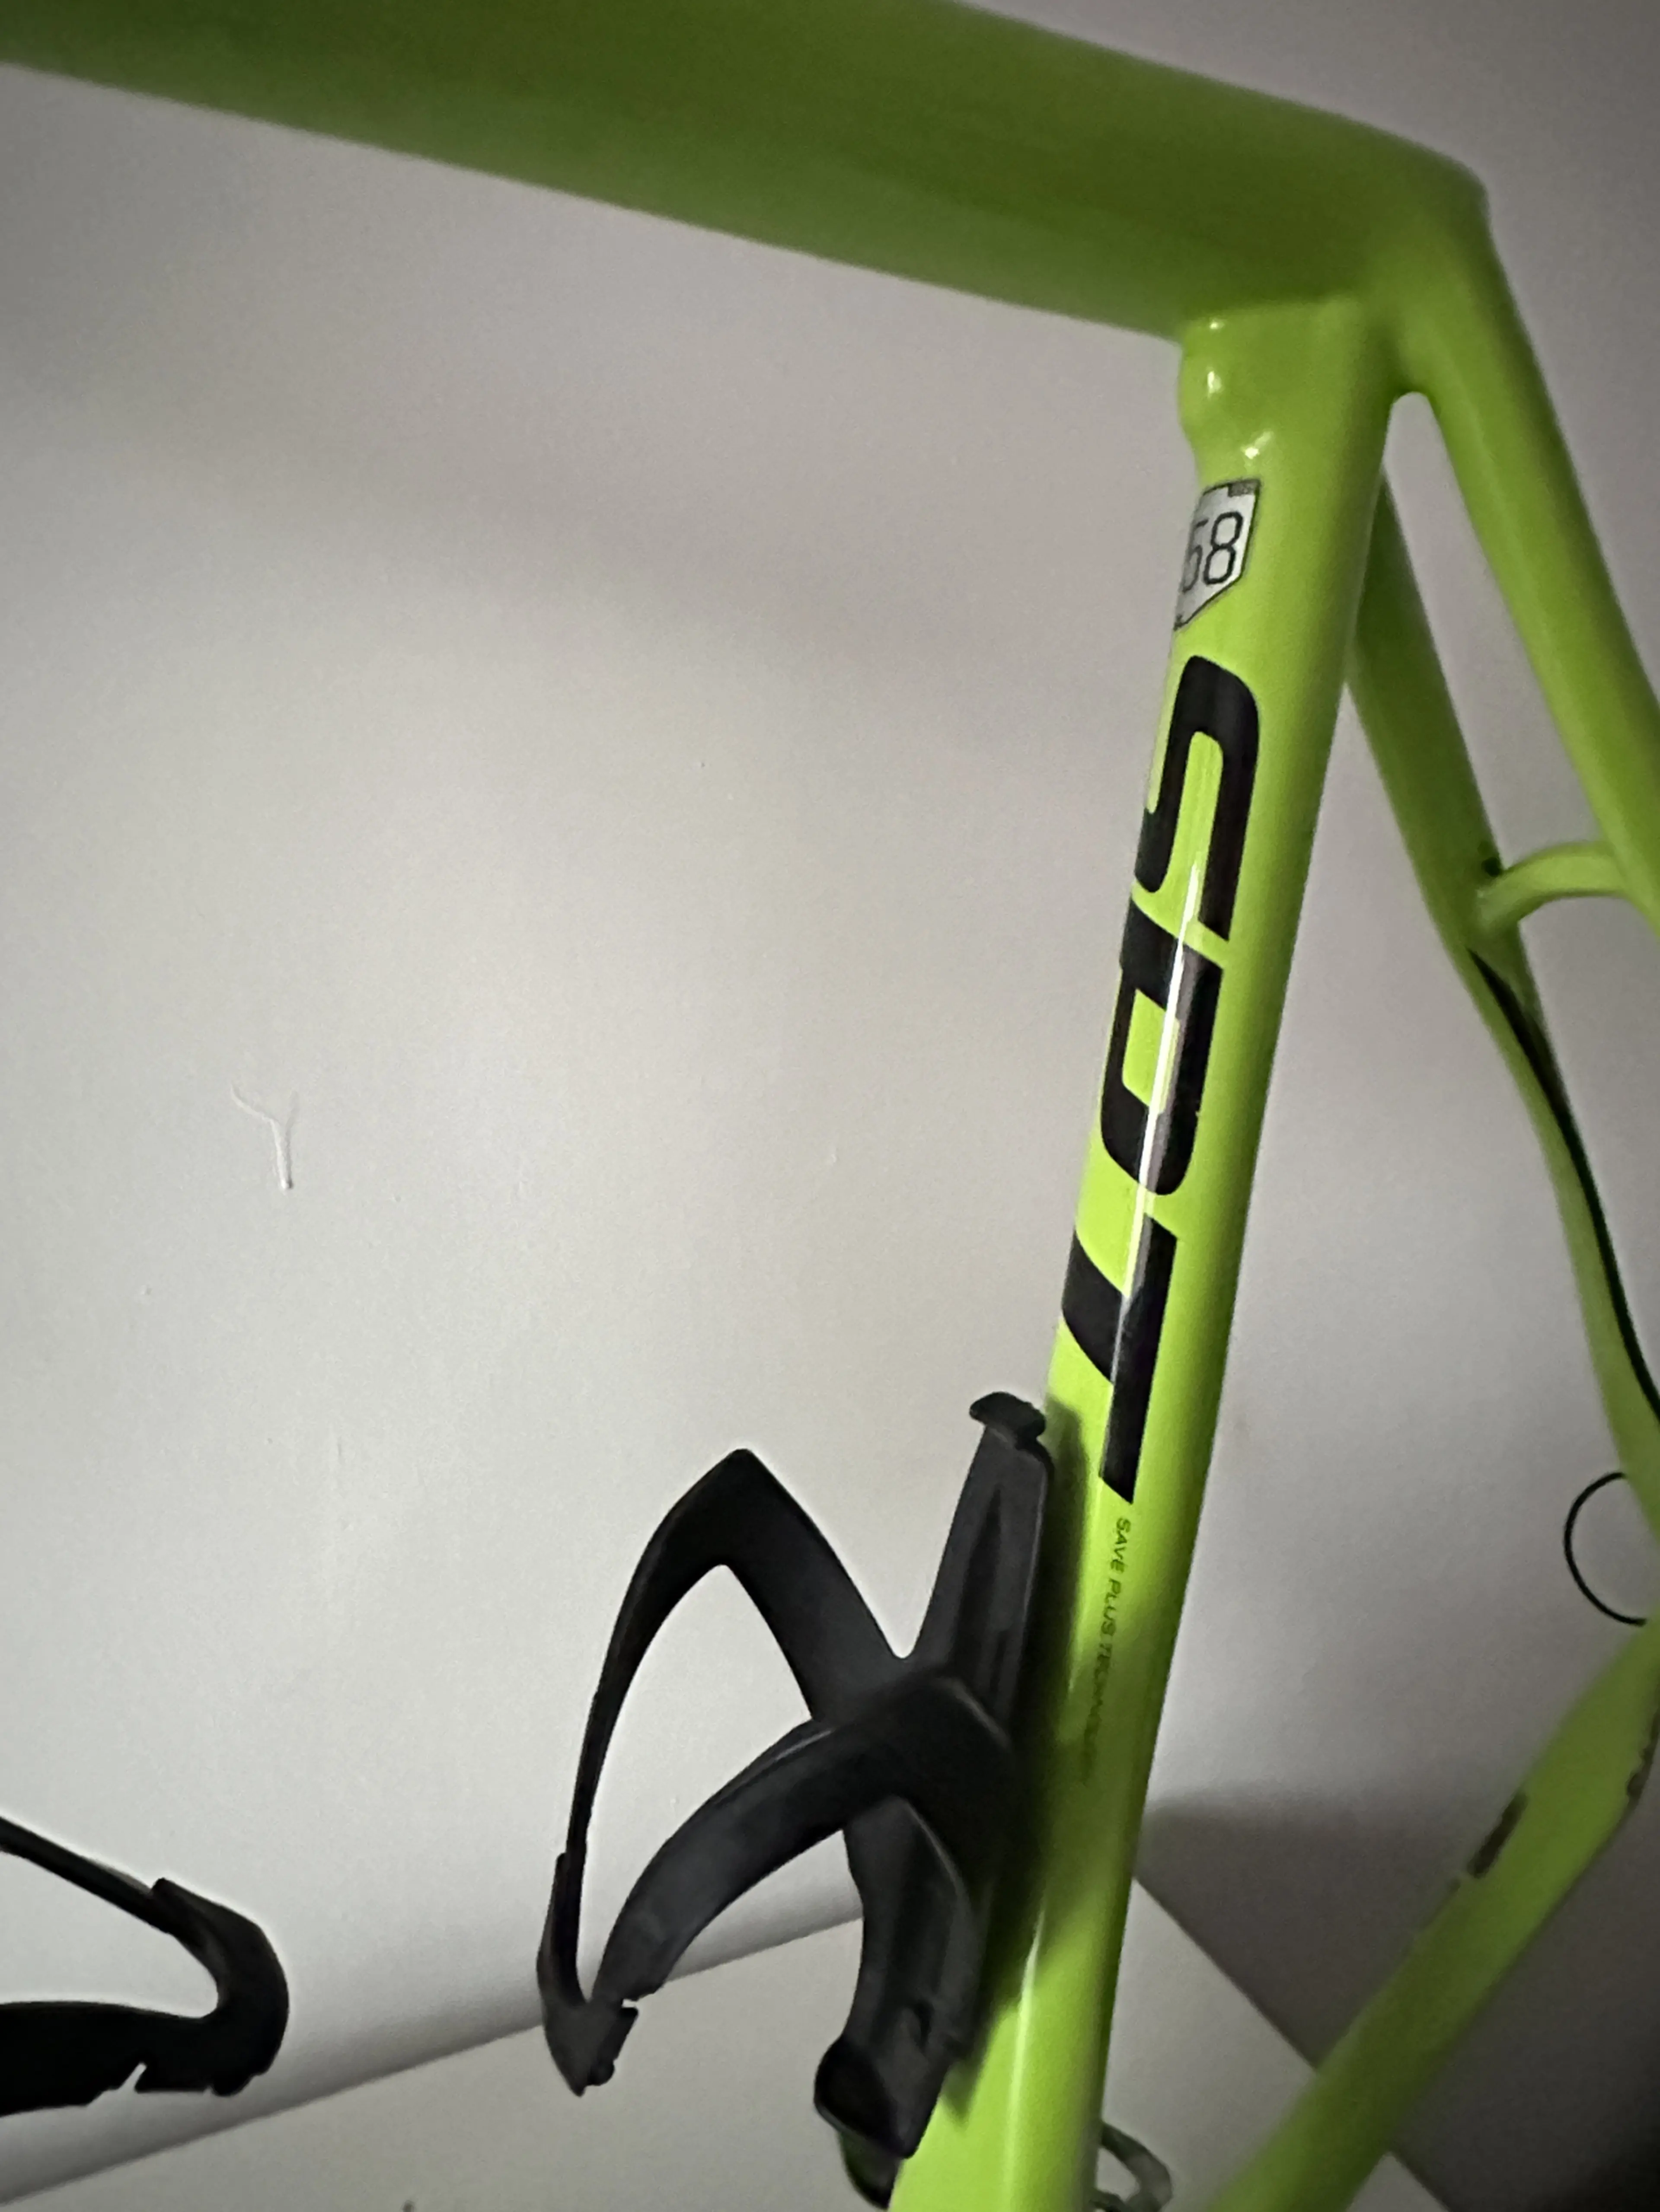 4. Cannondale Synapse Disc + Ultregra Di2 groupset